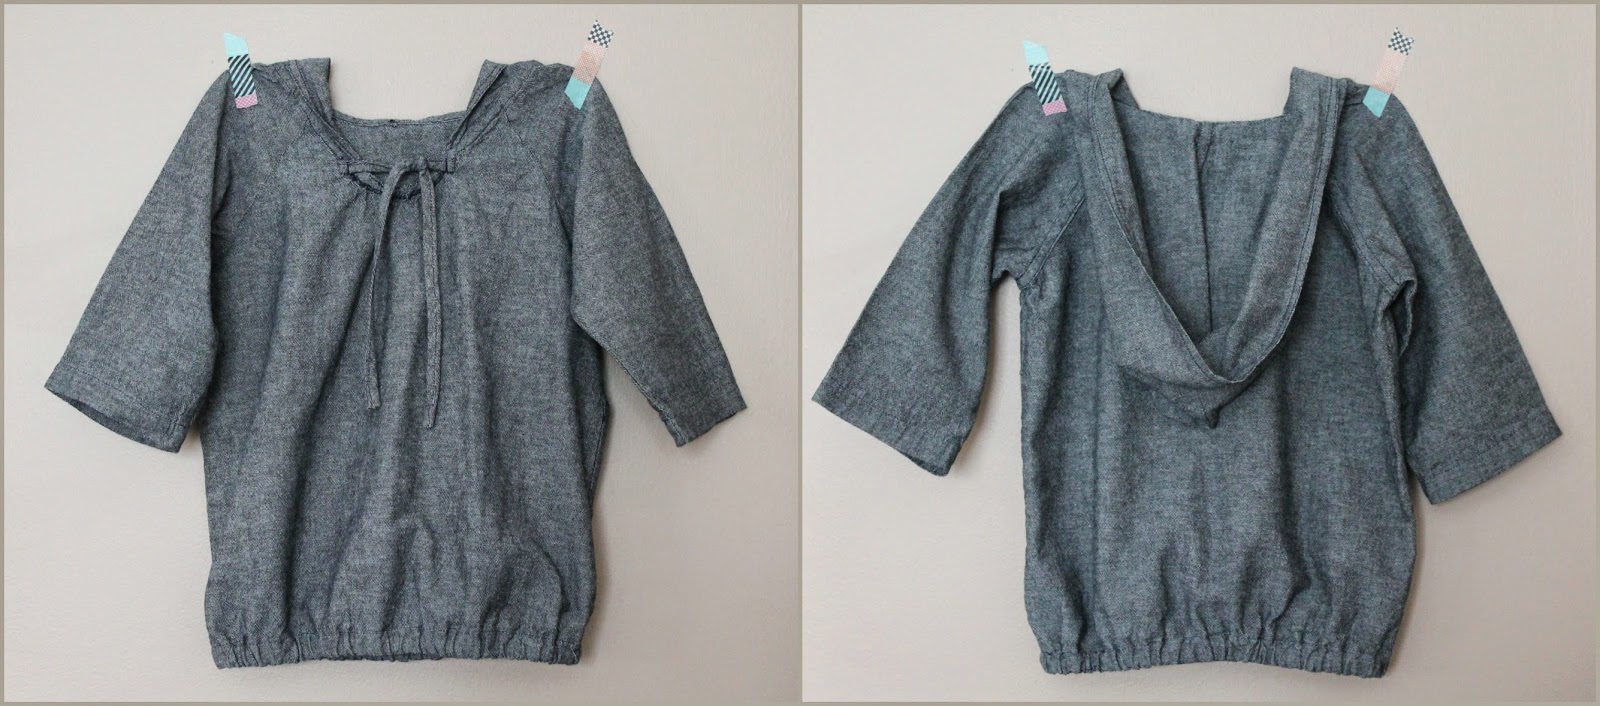 Sewing from Happy Homemade, Volume 2: Sew Chic Kids -- The Pull Over Parka (Pattern S) in Chambray | The Inspired Wren